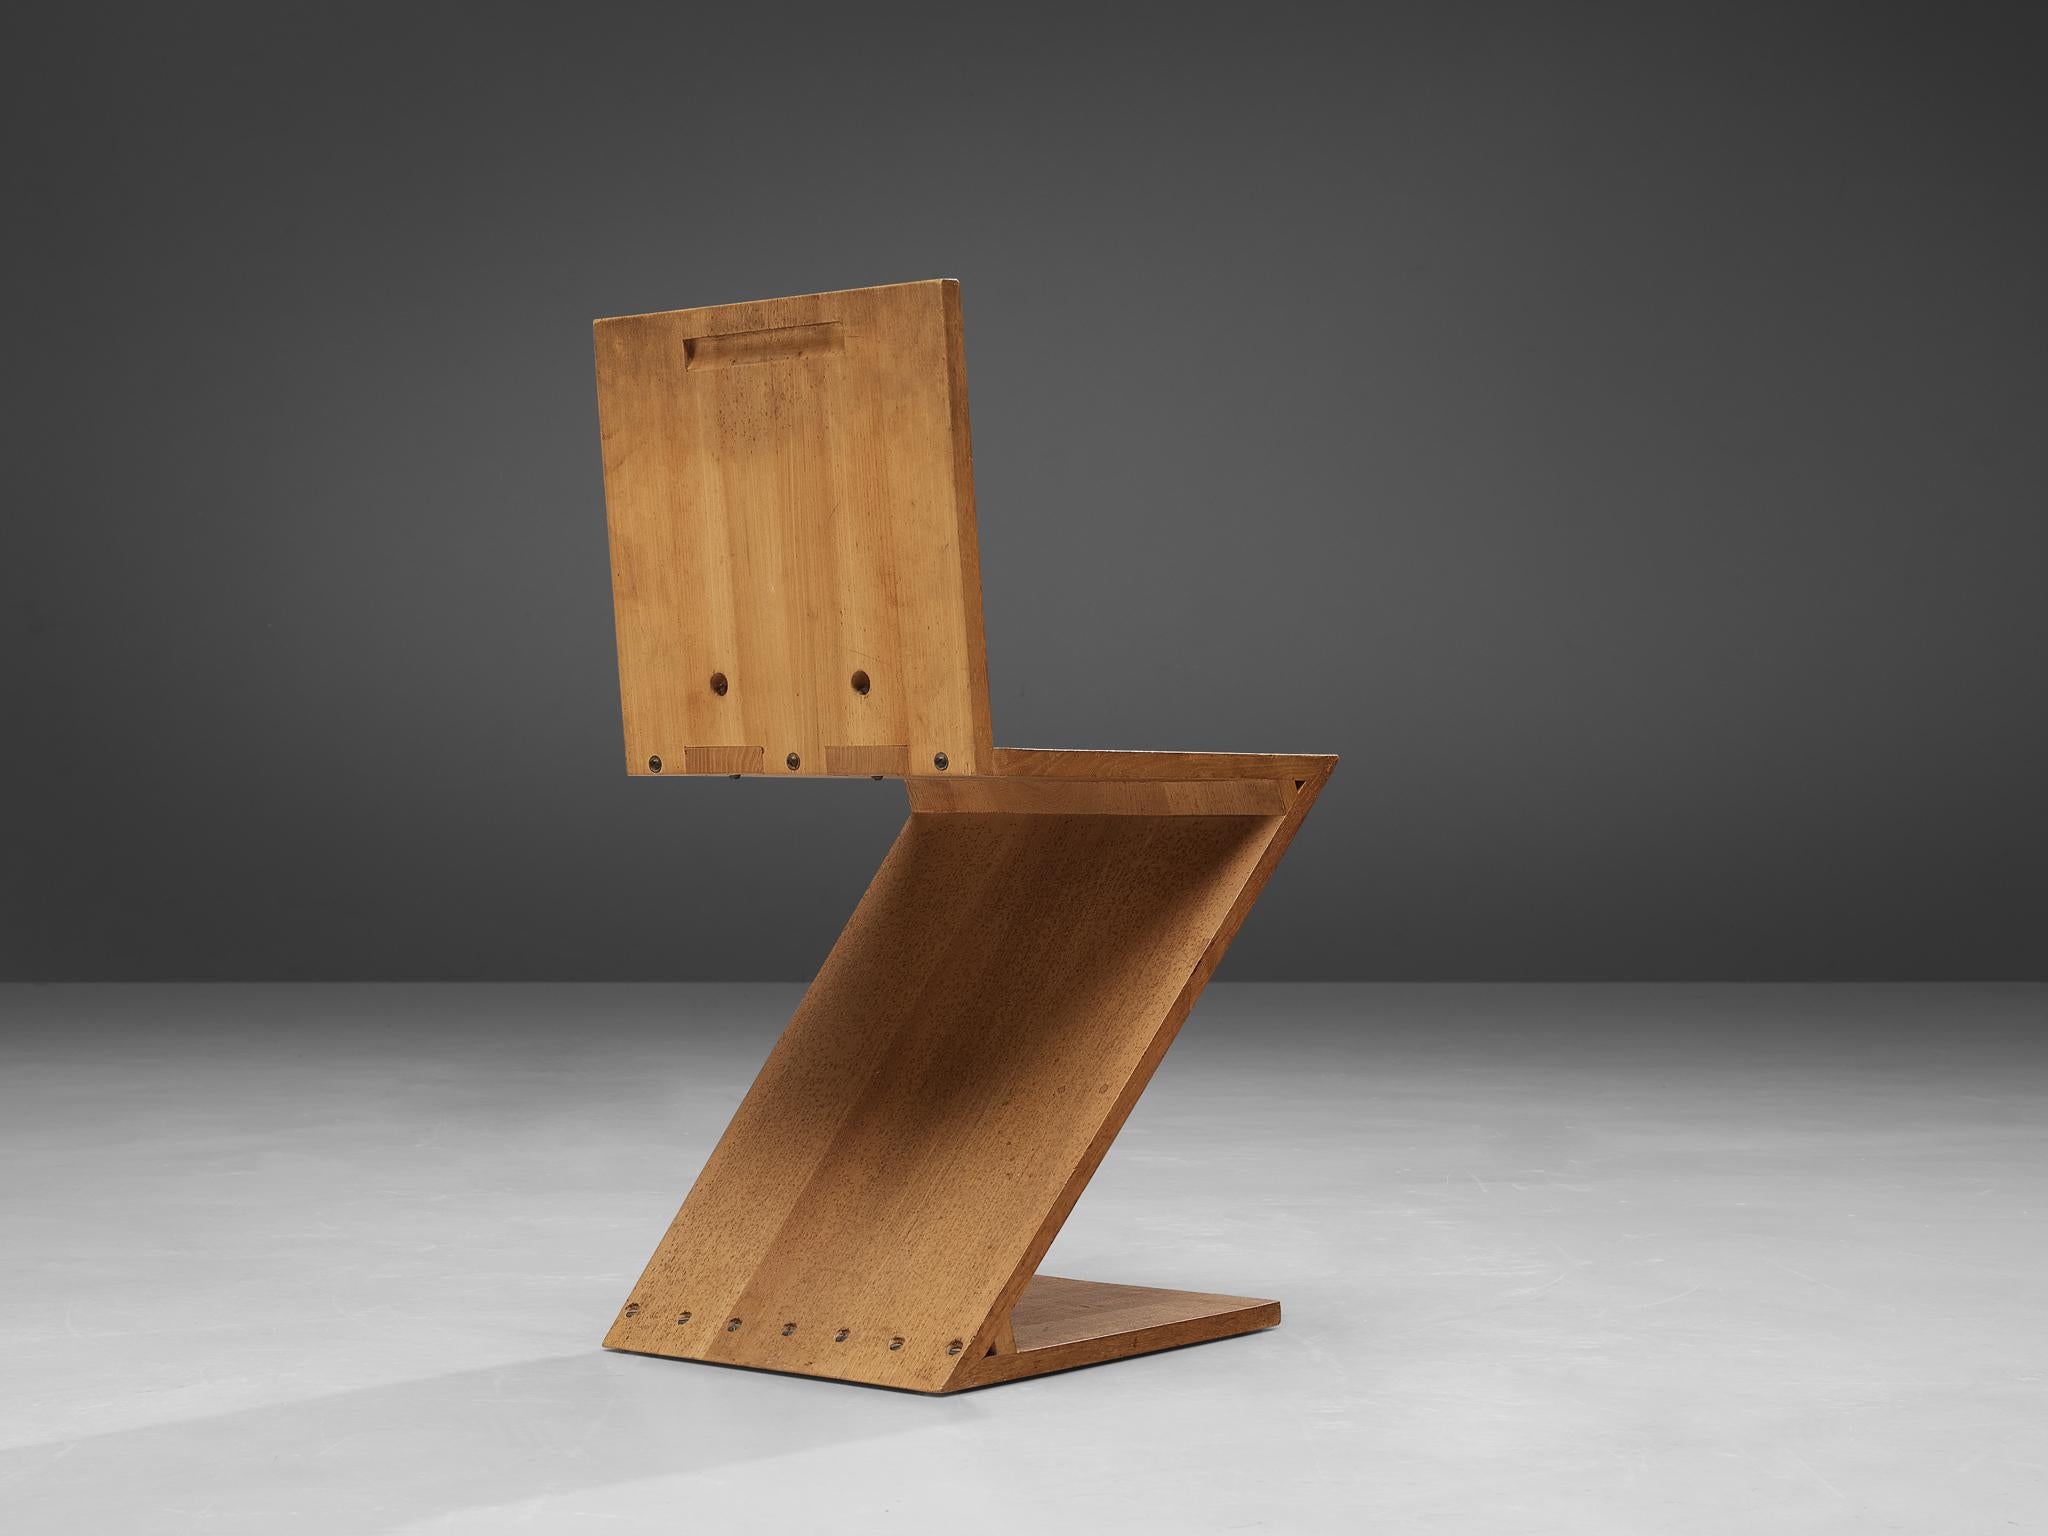 Gerrit Rietveld for Groenekan, ‘Zig Zag’ chair, elm, The Netherlands, design 1932/1933, manufactured between 1935-1973

Not a lot of chairs reach such fame like the ‘Zig Zag’ which is most likely one of the greatest icons ever designed by Gerrit